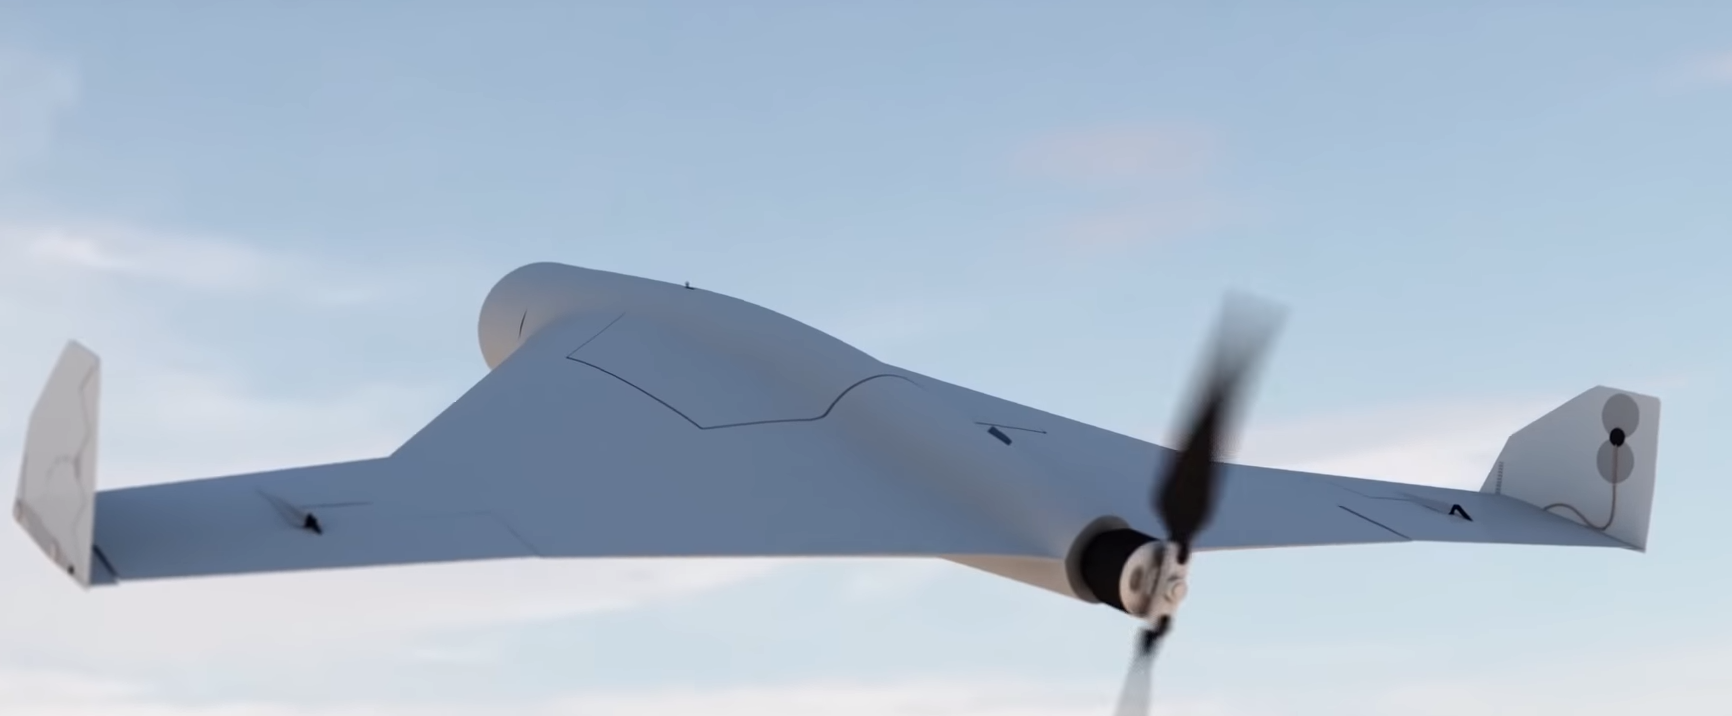 The Company That Makes the AK-47 Is Now Building Suicide Drones ...